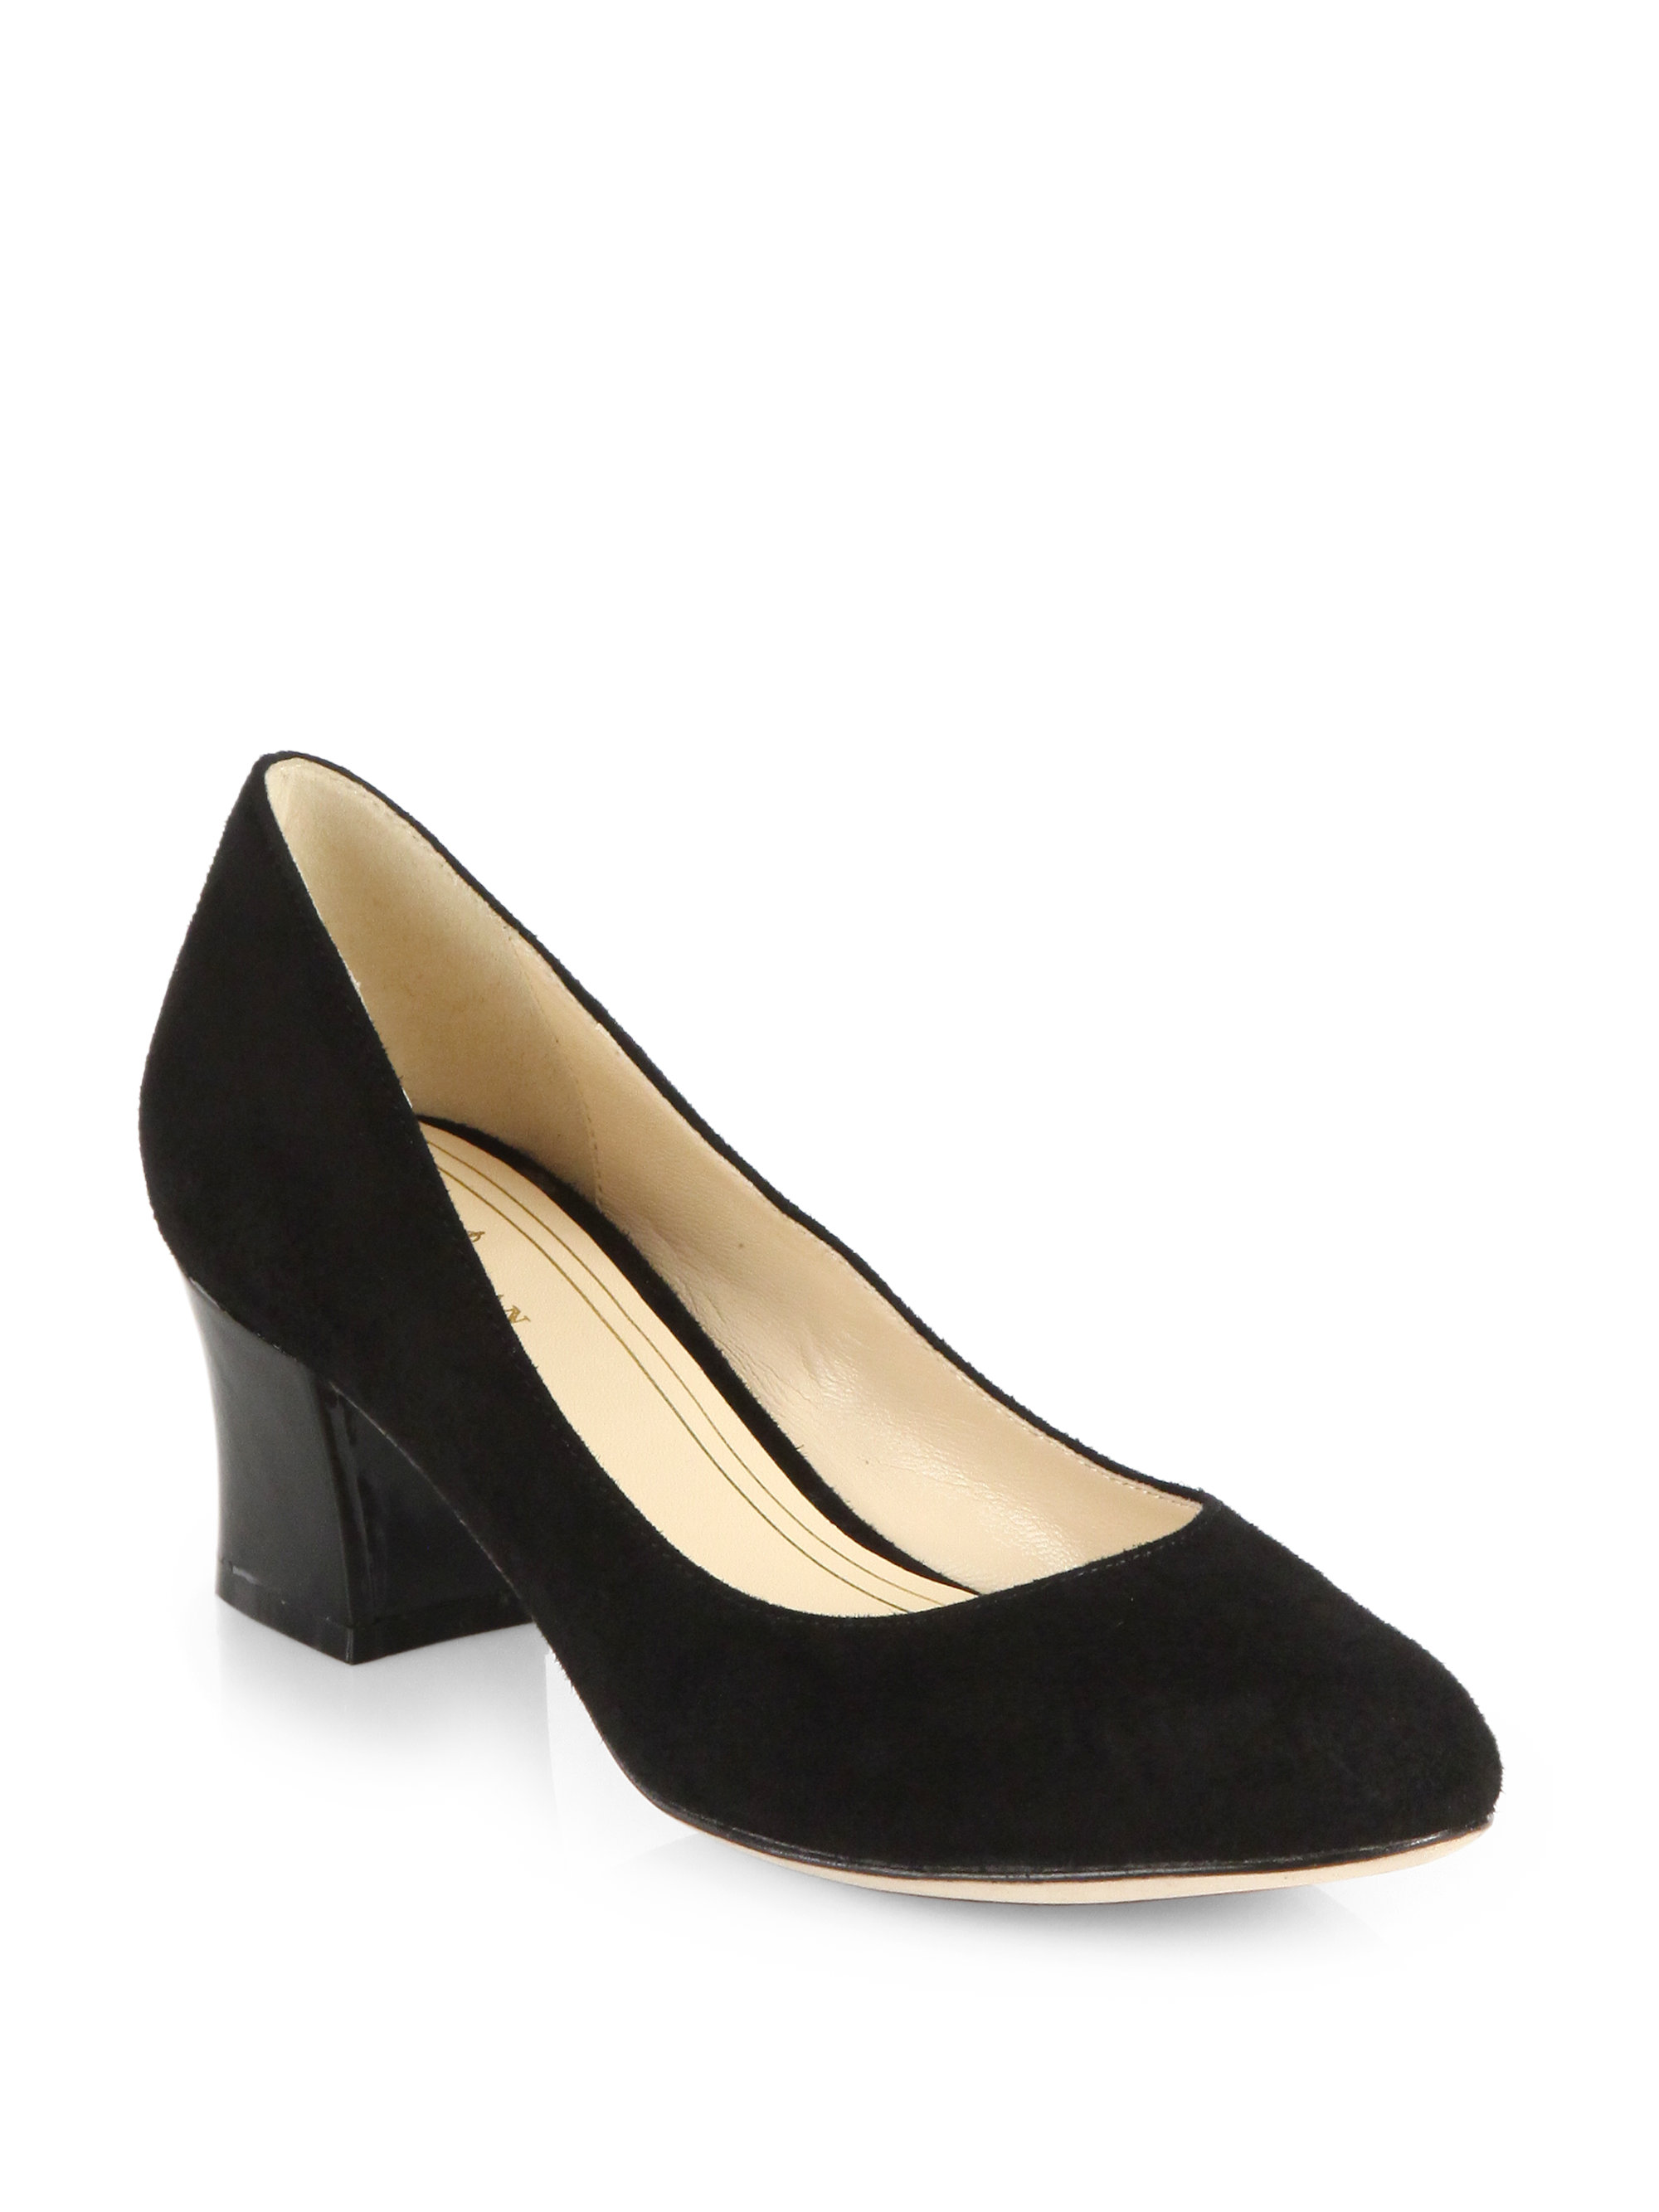 Cole Haan Chelsea Suede Patent Leather Pumps in Black | Lyst